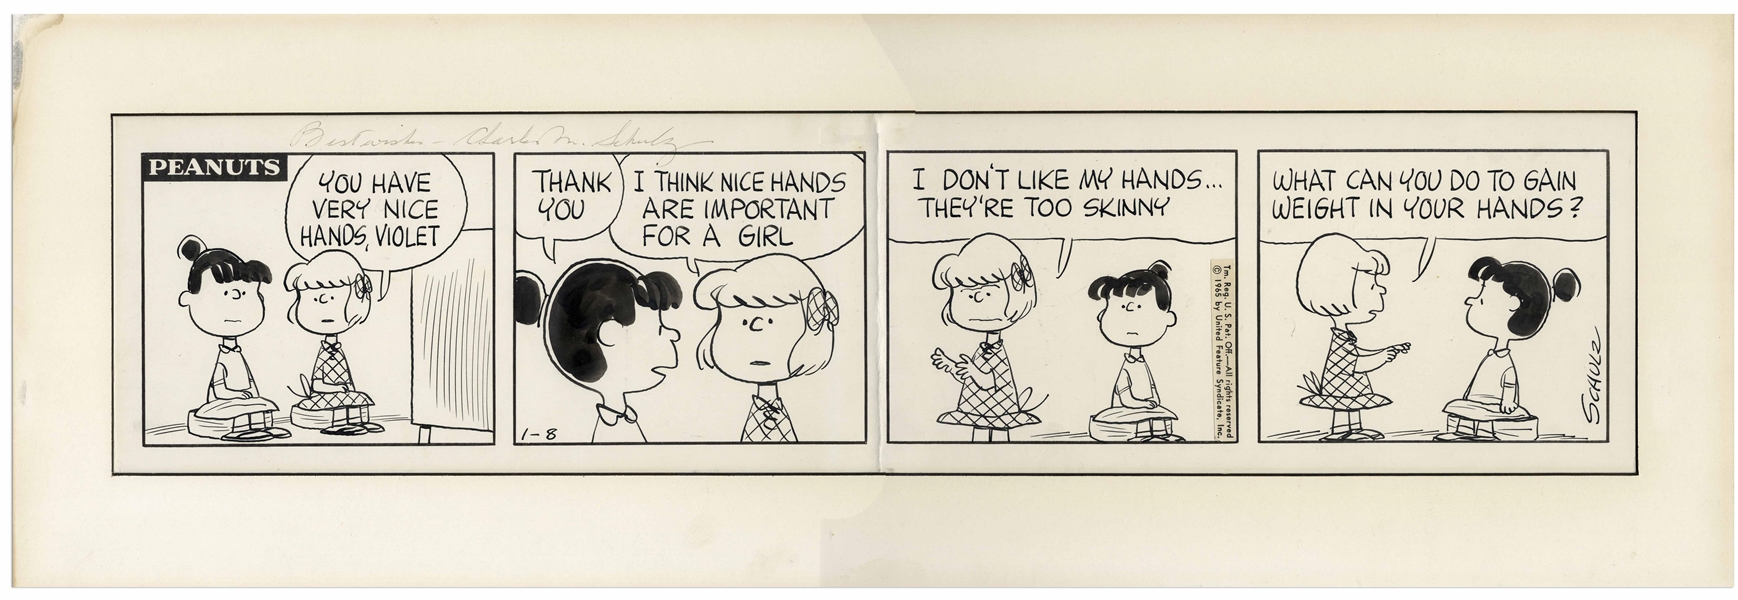 Charles Schulz Hand-Drawn ''Peanuts'' Comic Strip, From 1965 Featuring Violet & Patty